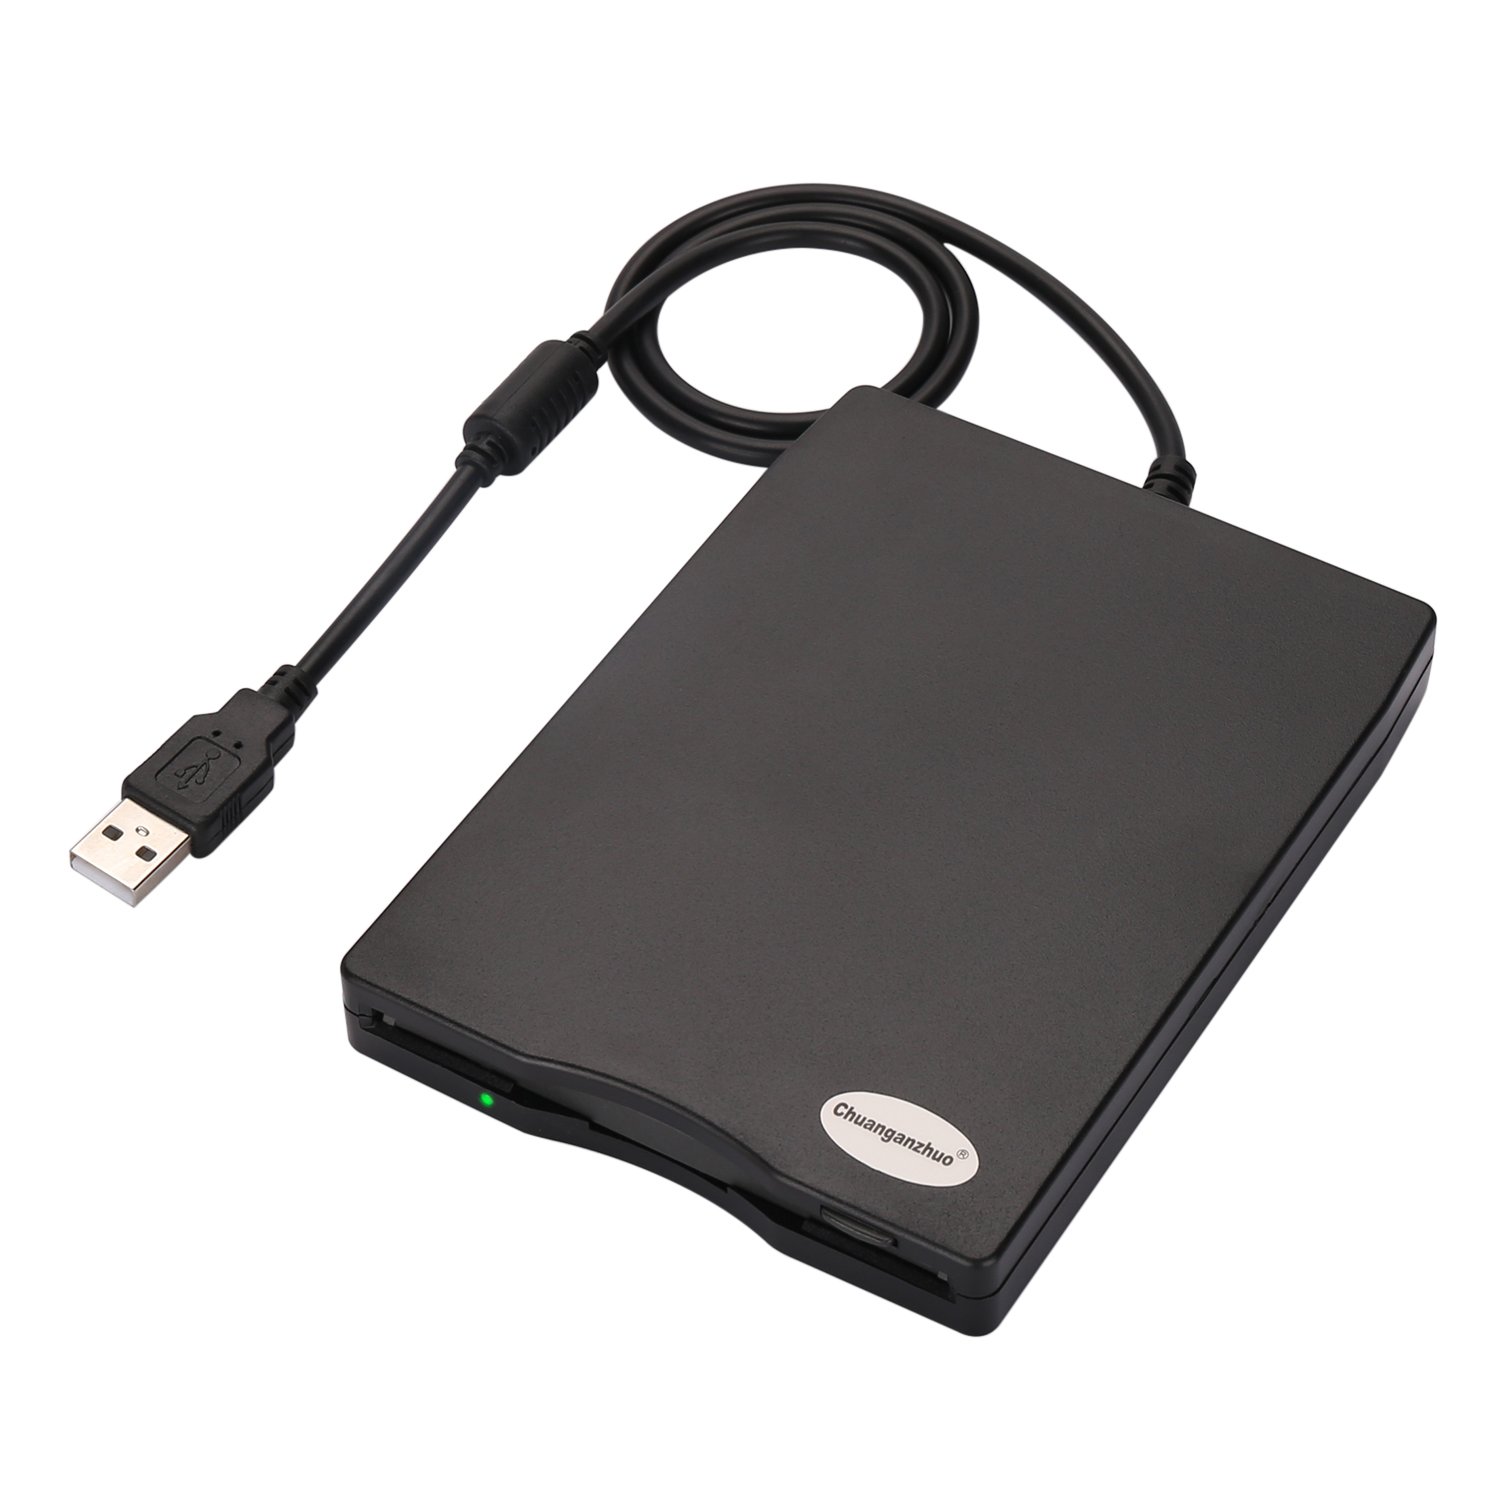 $21 3.5 floppy disk reader powered External Portable 1.44 MB capacity, for PC Windows 2000/XP/Vista/7/8 or highe, Plug and Play Amazon FSSS or Prime